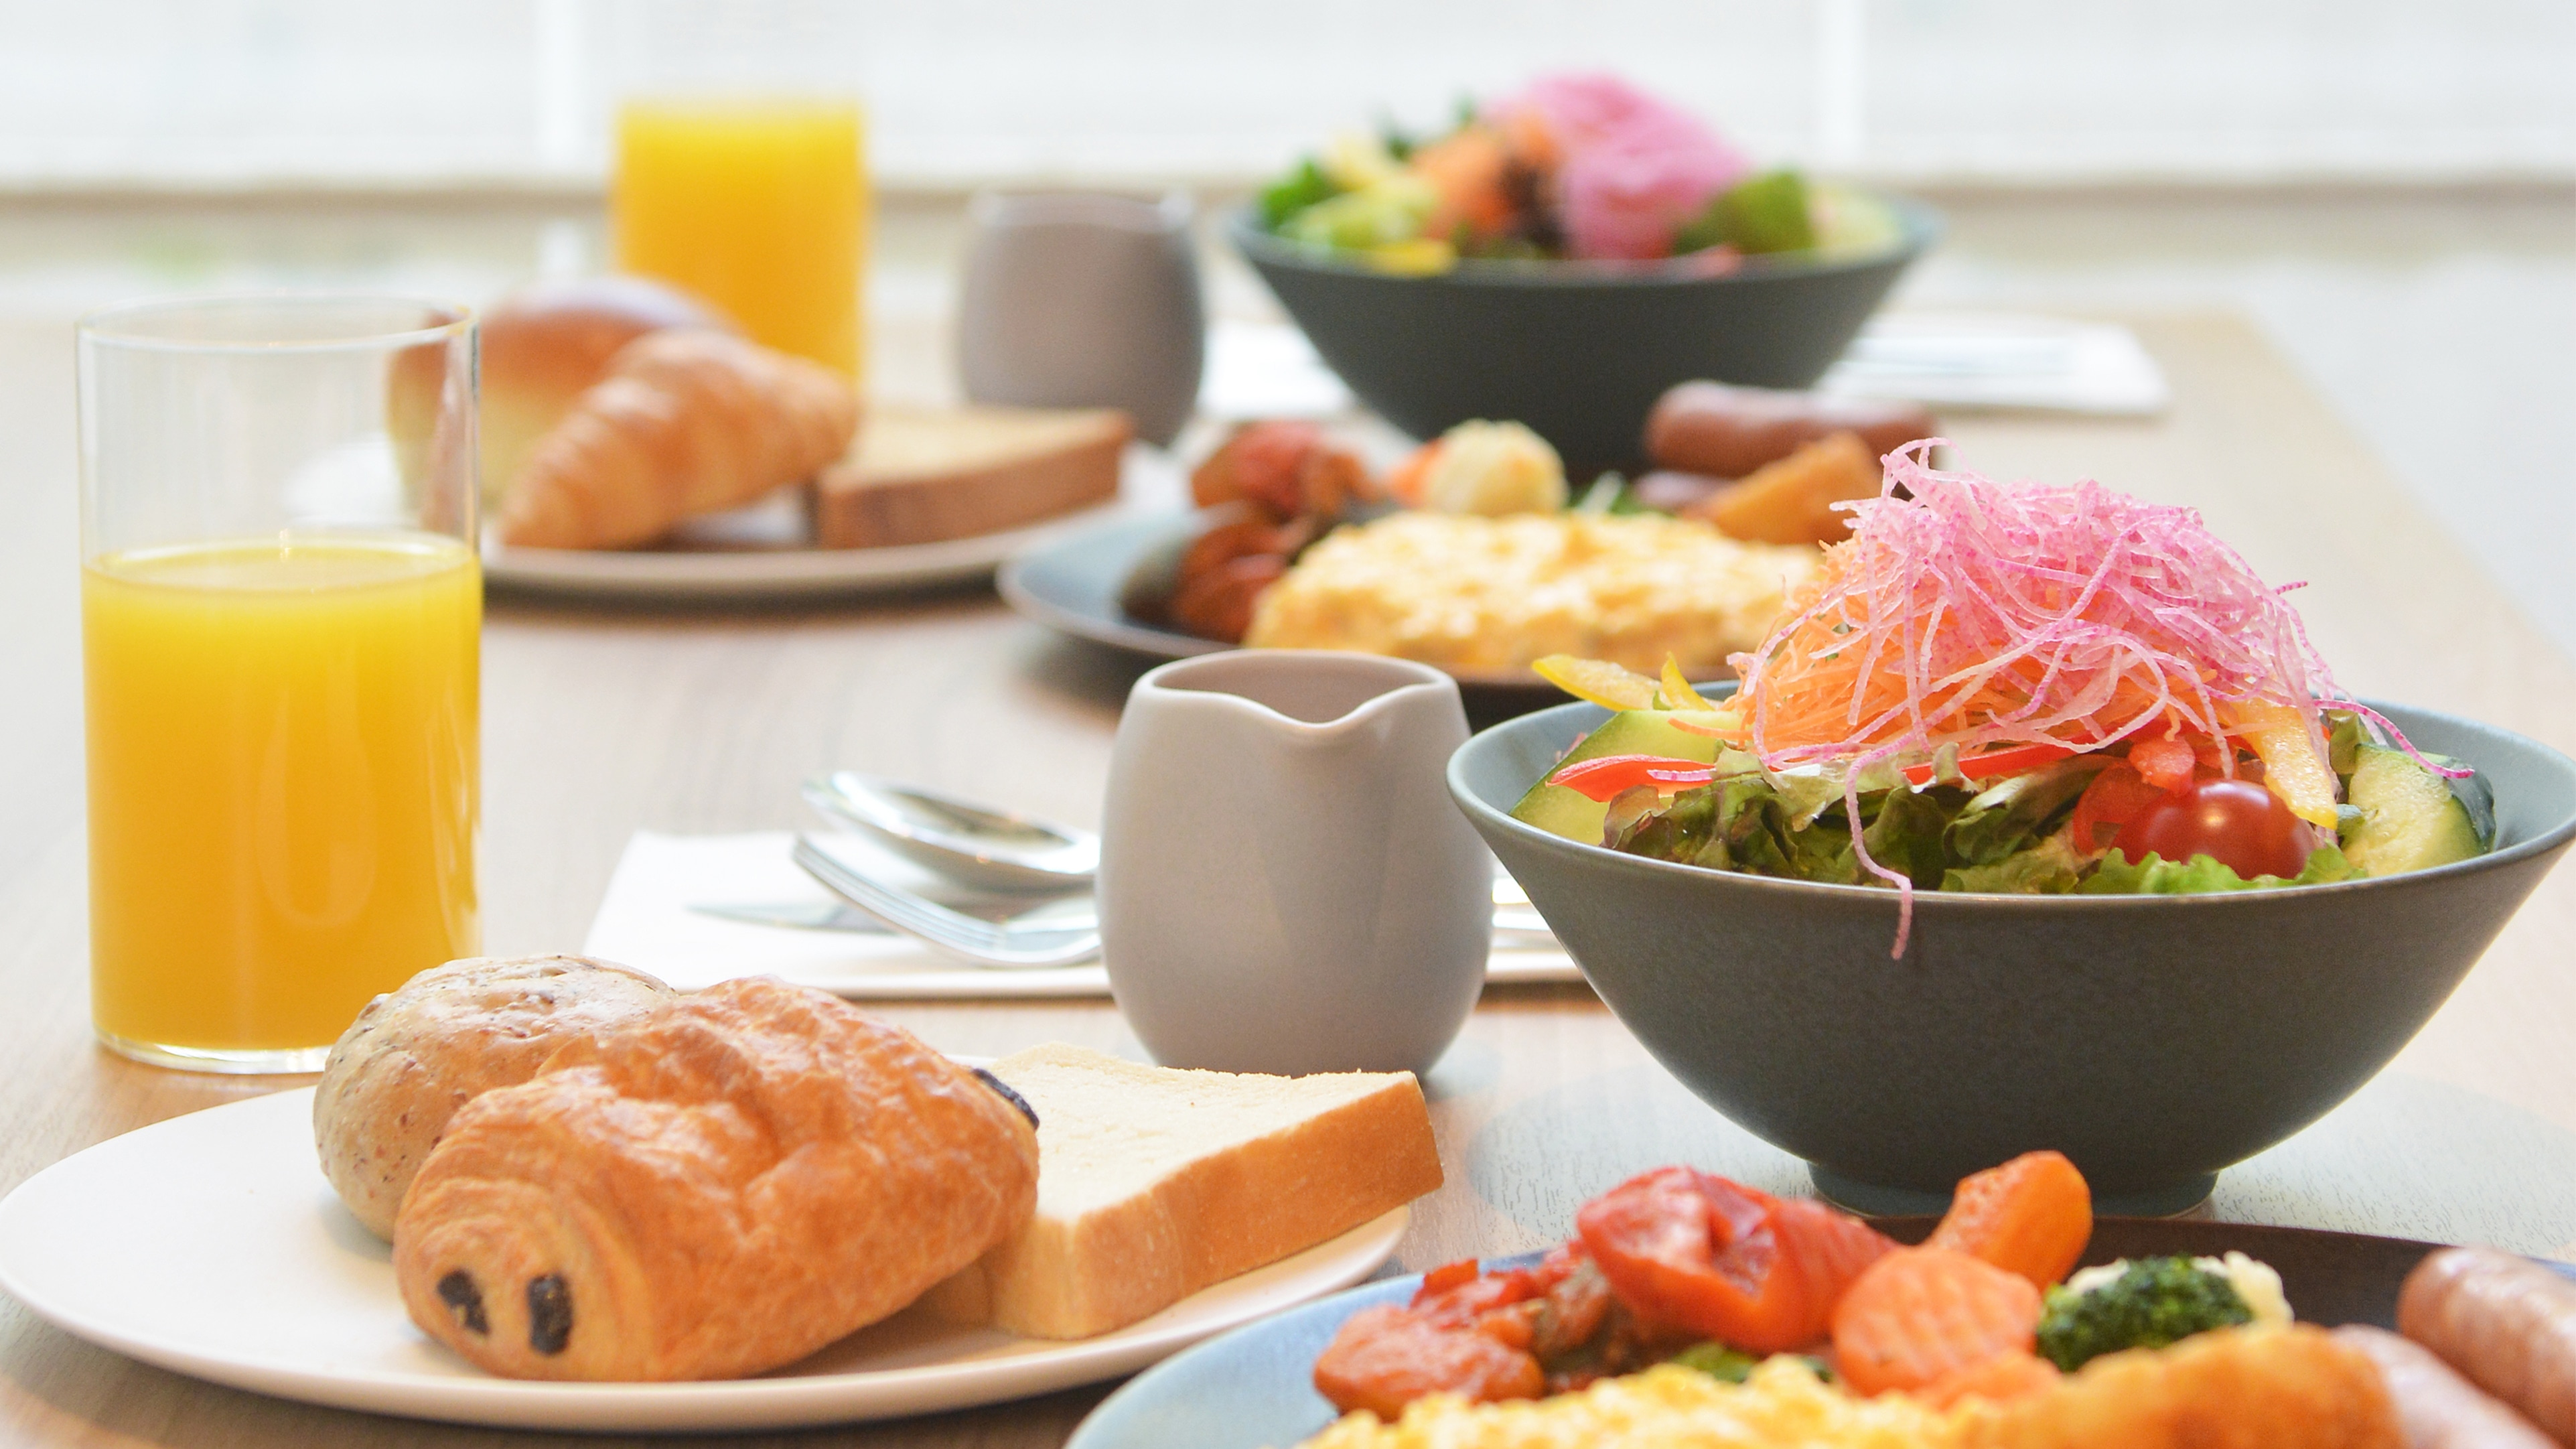 Breakfast, which is the start of the day, is at the open and spacious restaurant "Together & Co.".